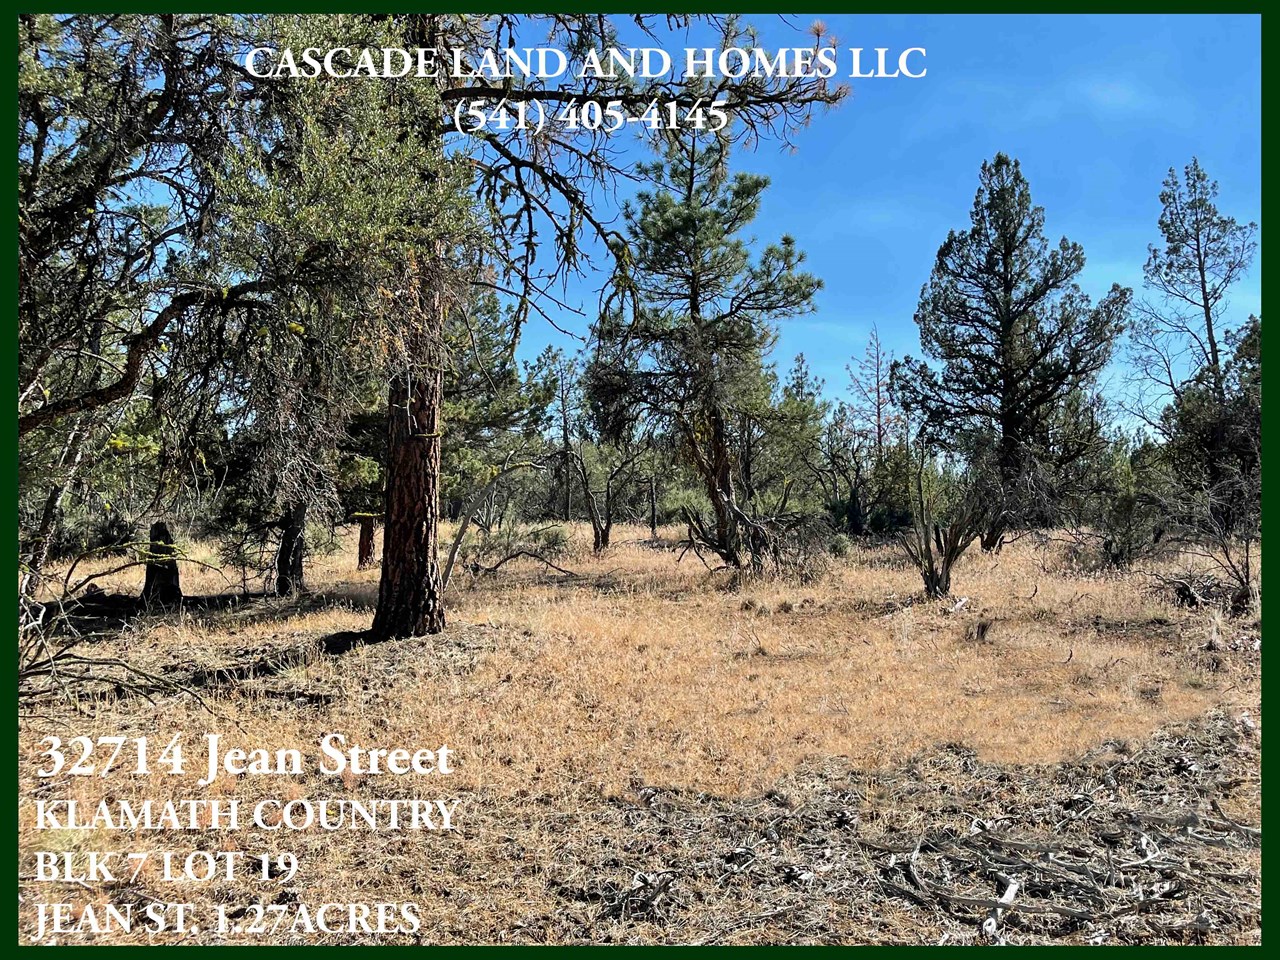 this subdivision in centrally located between chiloquin and sprague river. the roads within the subdivision are very well-maintained gravel roads, and the road to the subdivision is paved and county maintained.